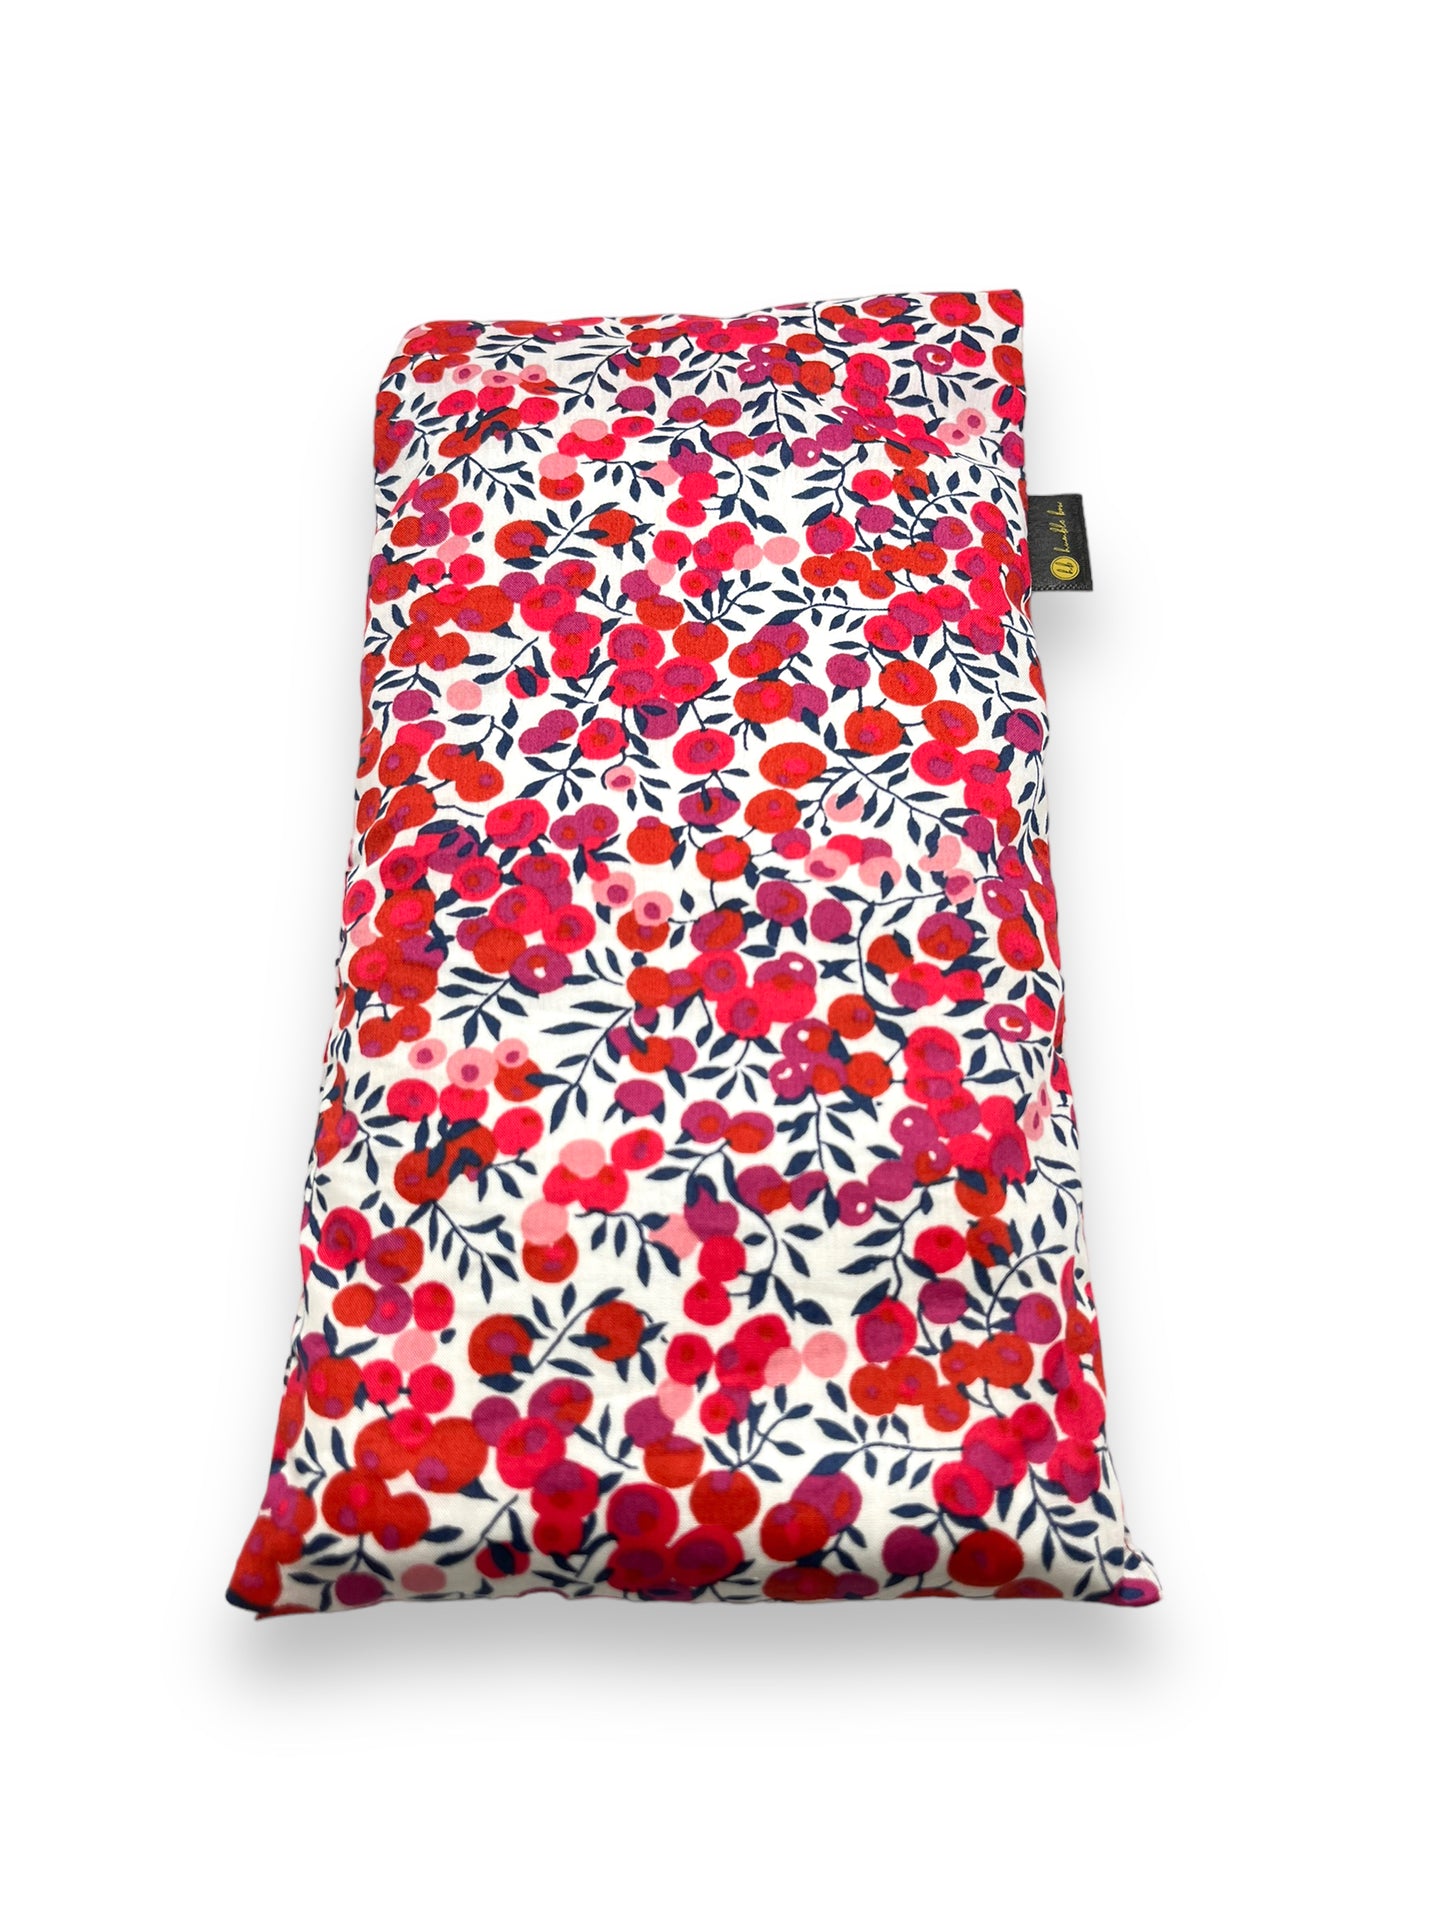 Lavender Eye Pillow - Liberty Wiltshire Red